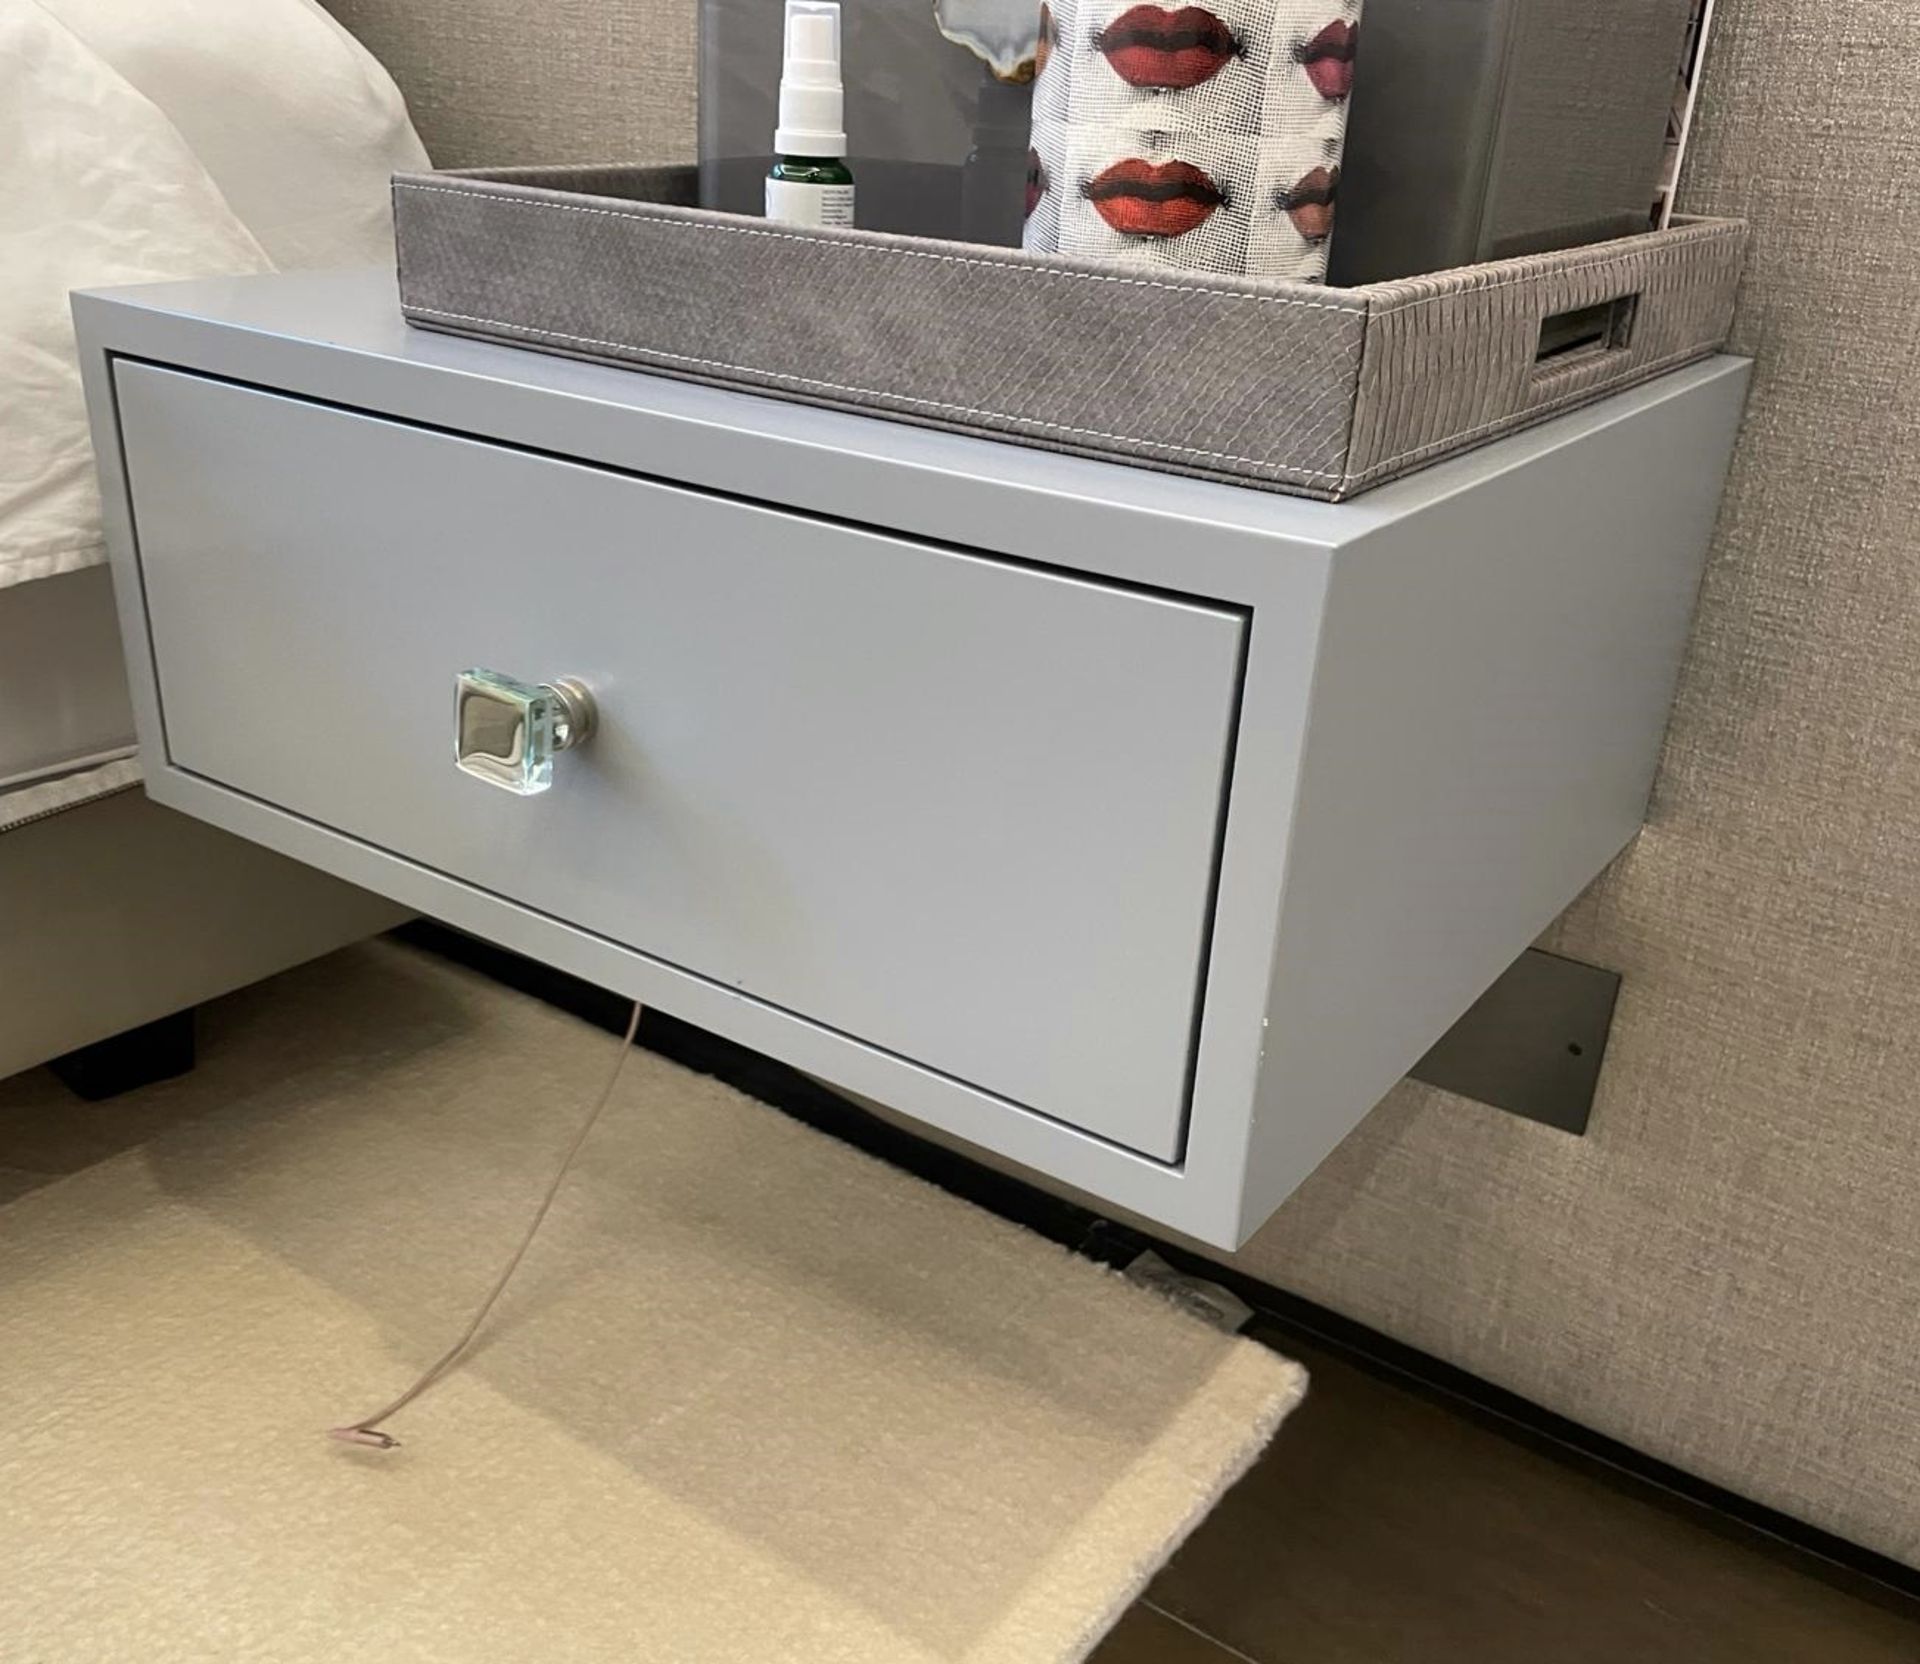 Pair of Stylish Wall Hung Bedside Drawers with a Grey Lacquer Finish and Glass Handles - Image 4 of 14